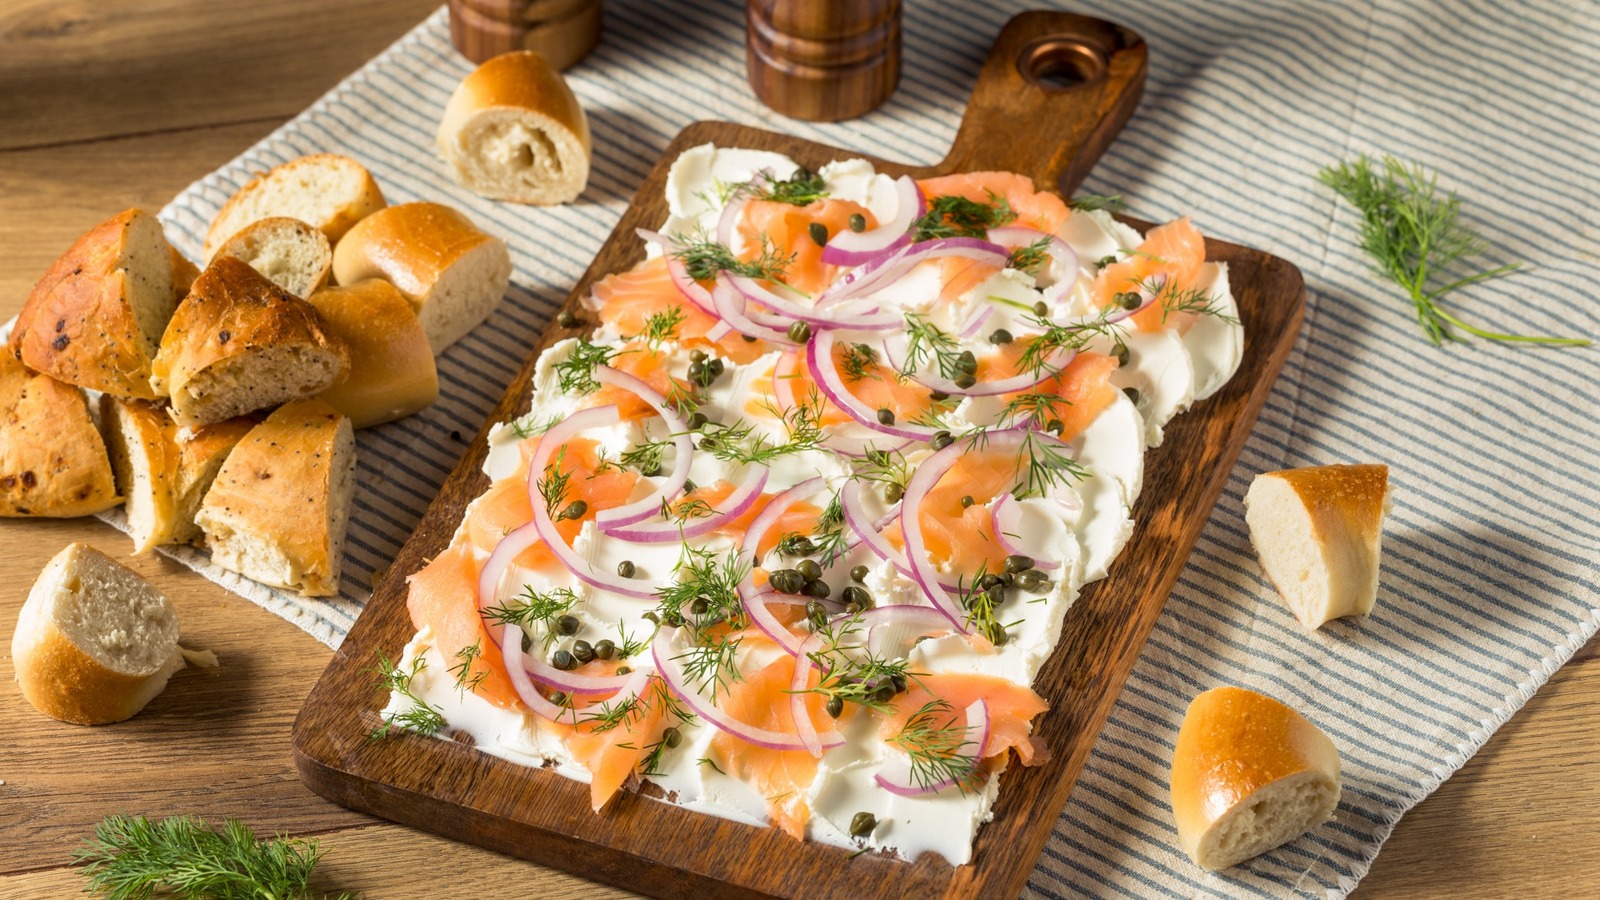 https://www.thedailymeal.com/img/gallery/what-exactly-is-a-cream-cheese-board-and-how-do-you-make-one/l-intro-1691623742.jpg